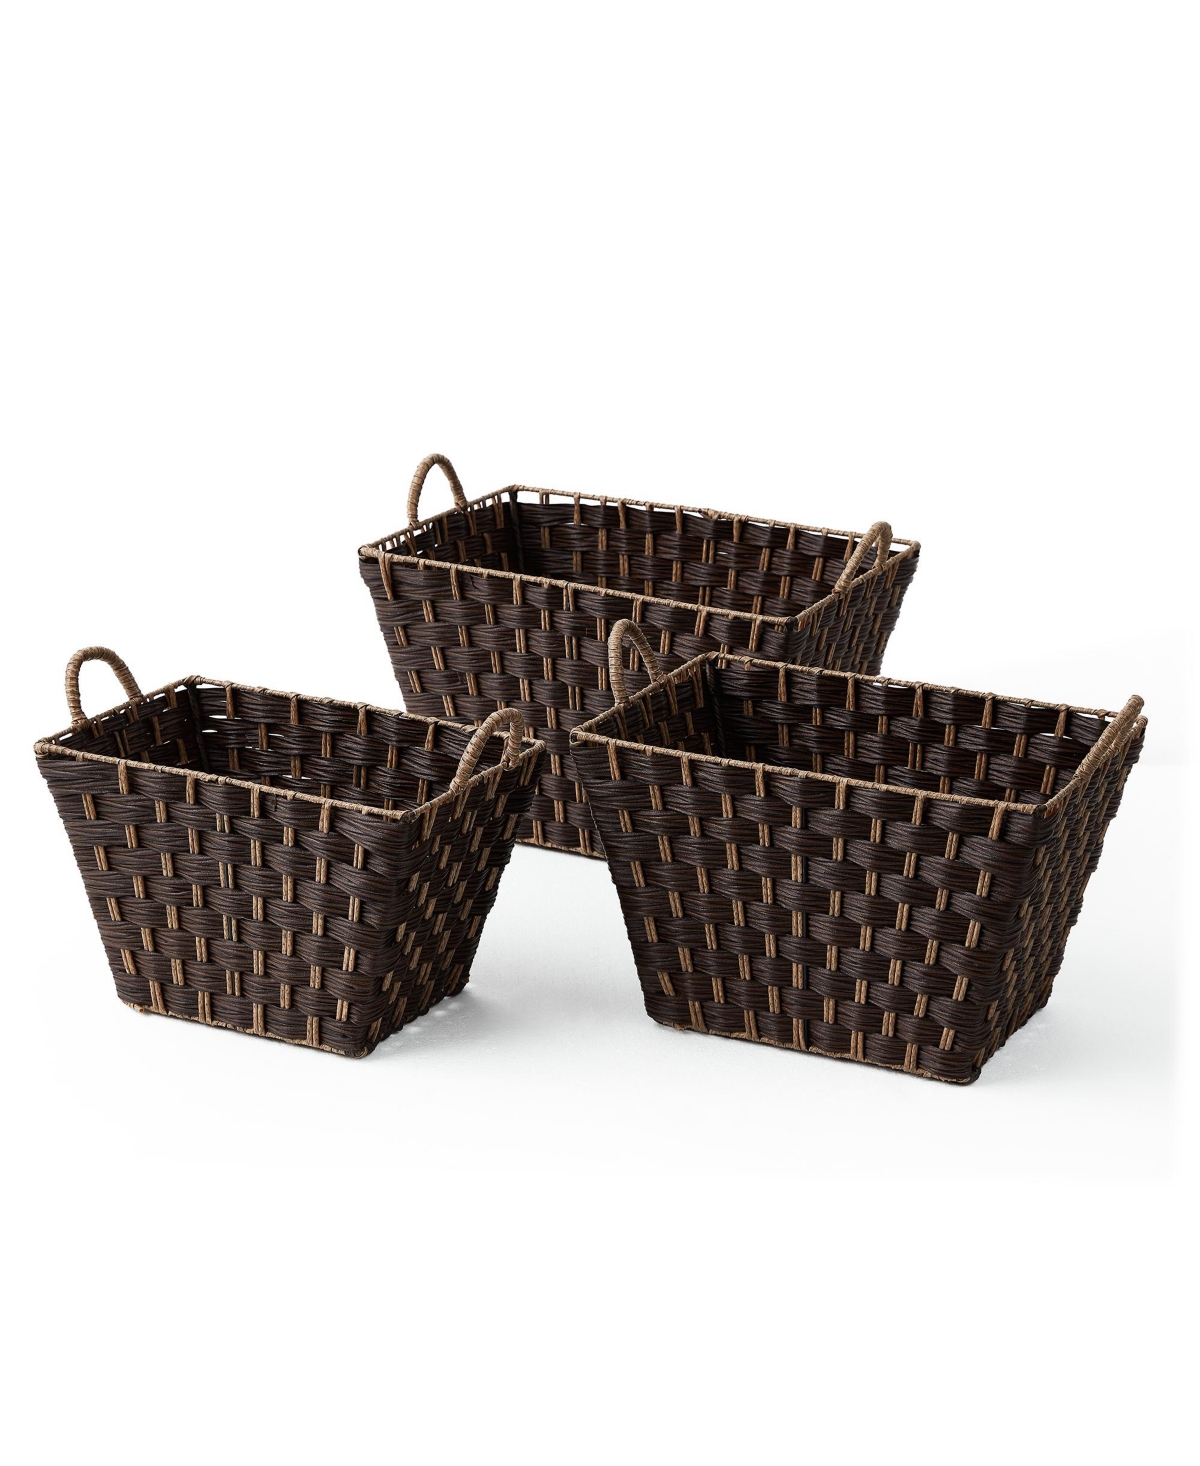 3 Piece Rectangular Faux Wicker Storage Bin Set in Combo Weave with Cut Out Handles - Brown